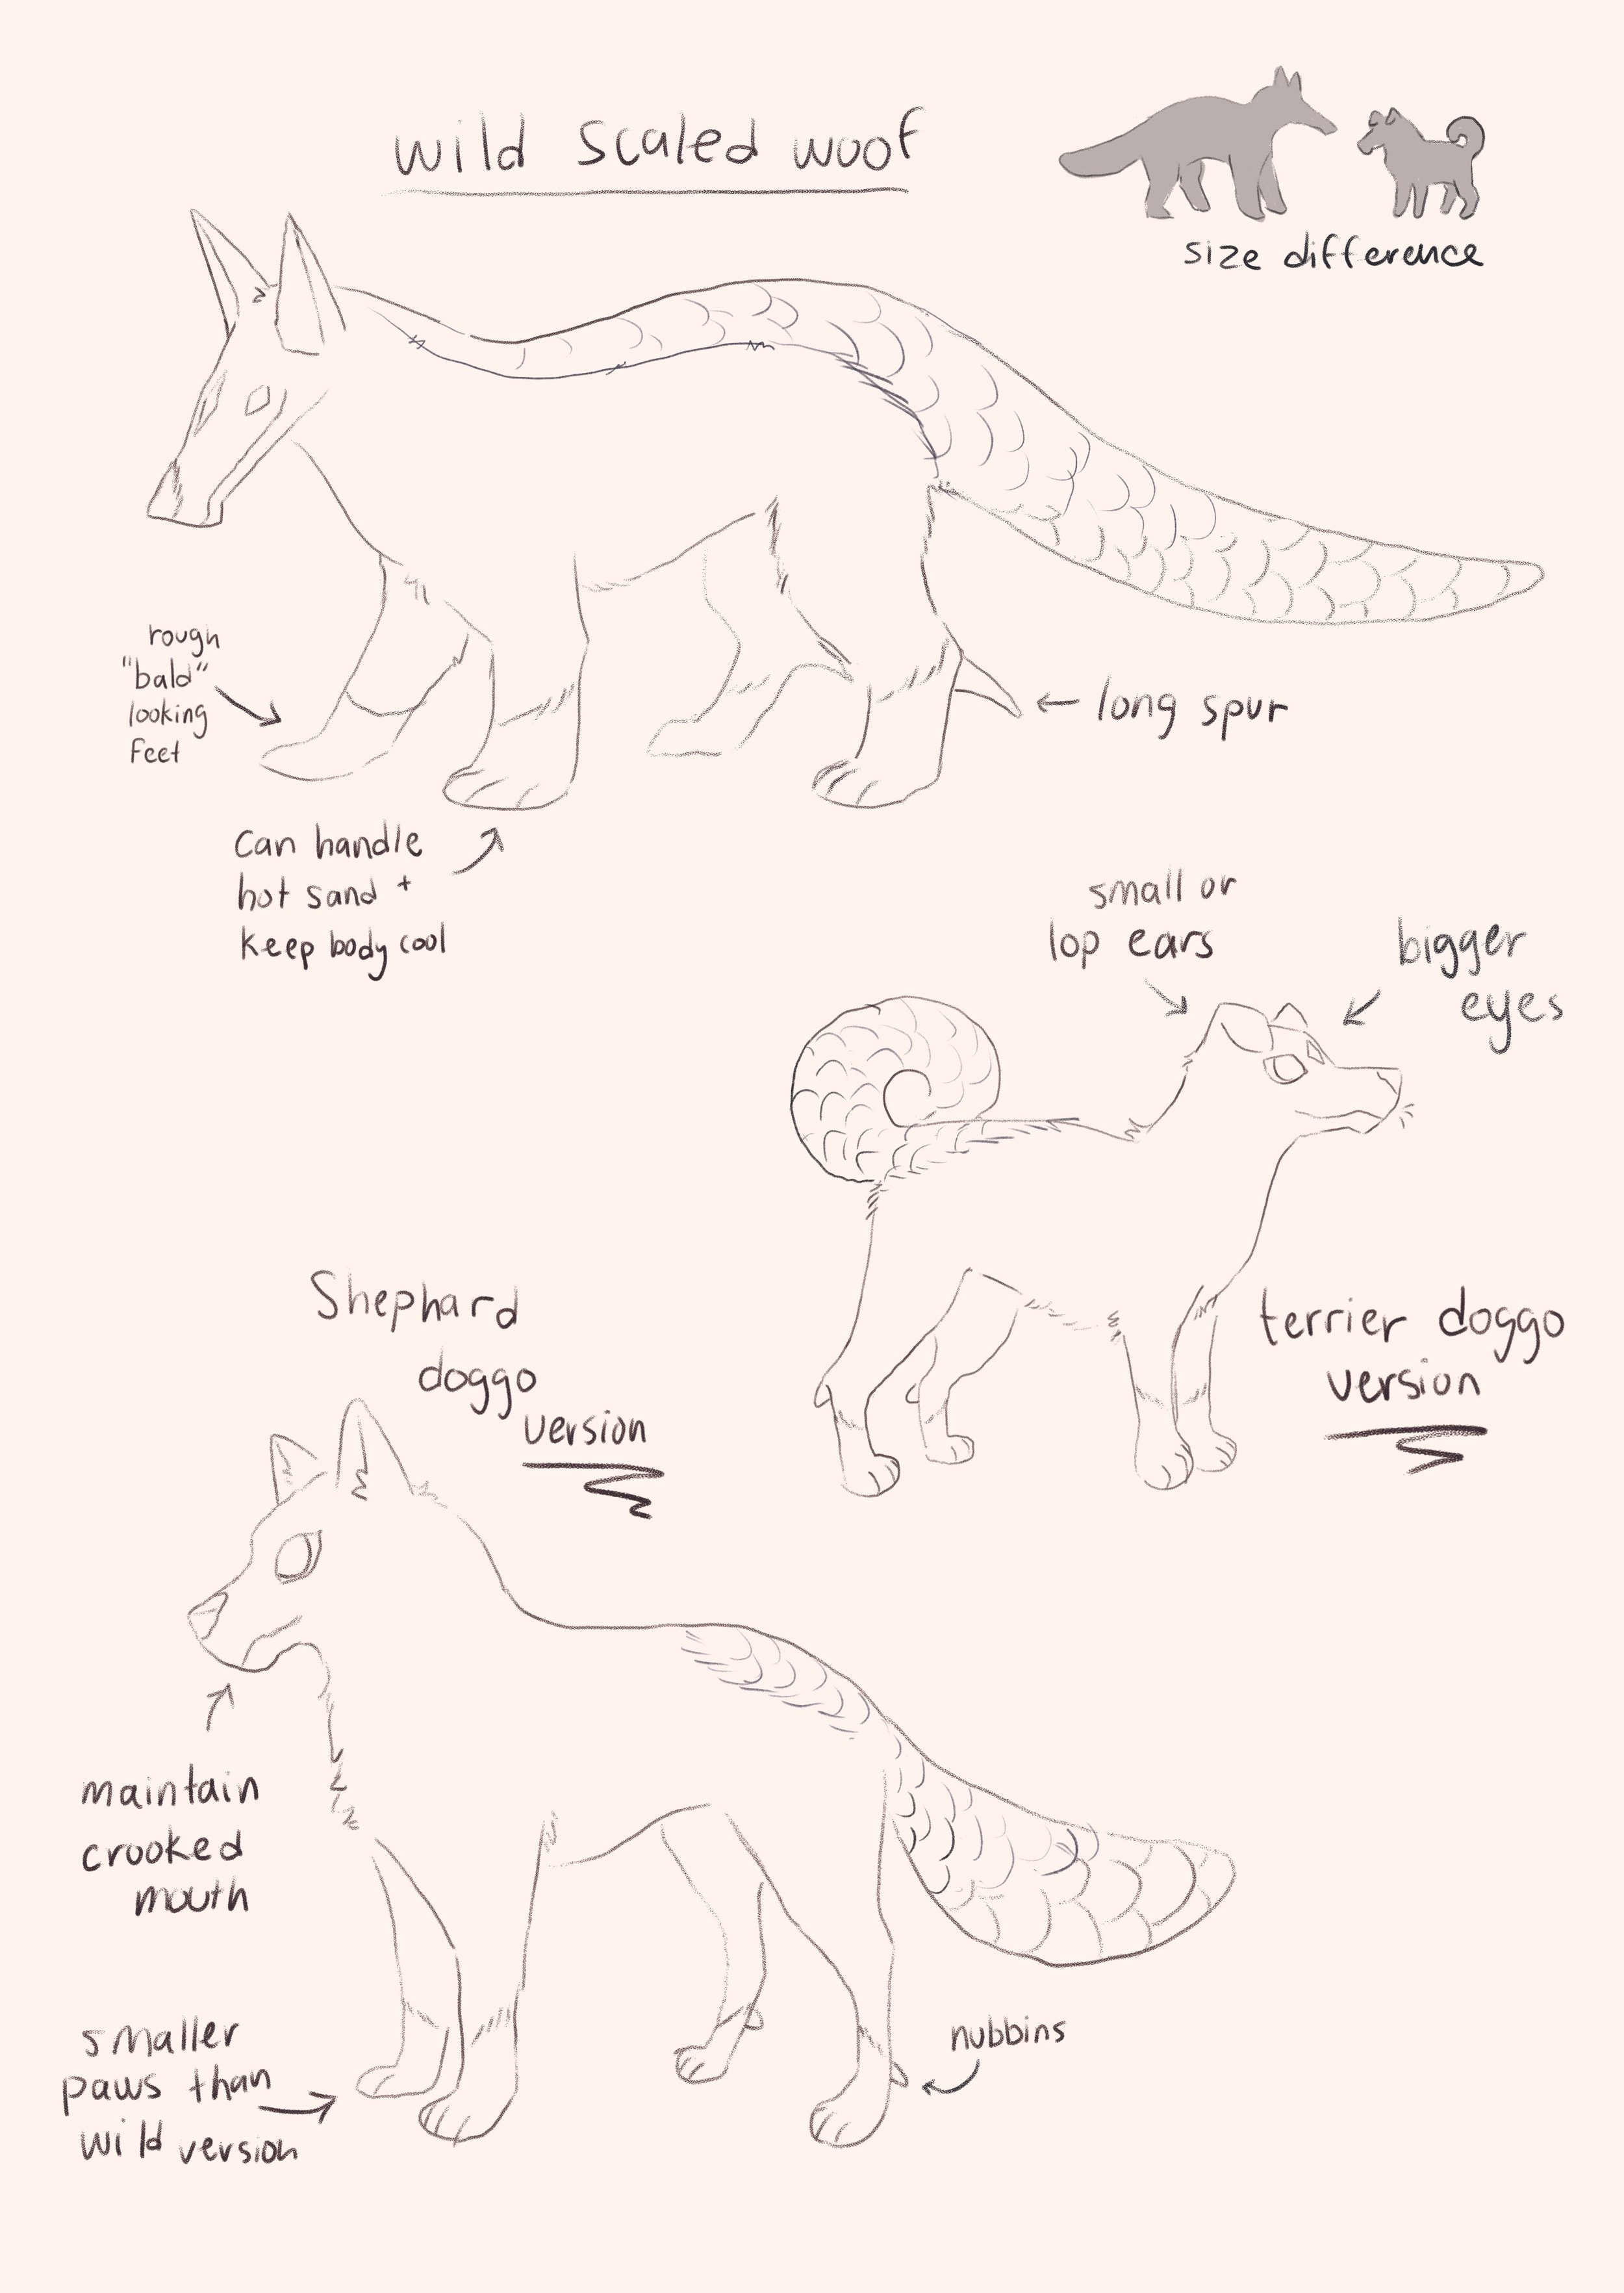 SAND - Travel Guide - Scaled Wolf.jpg